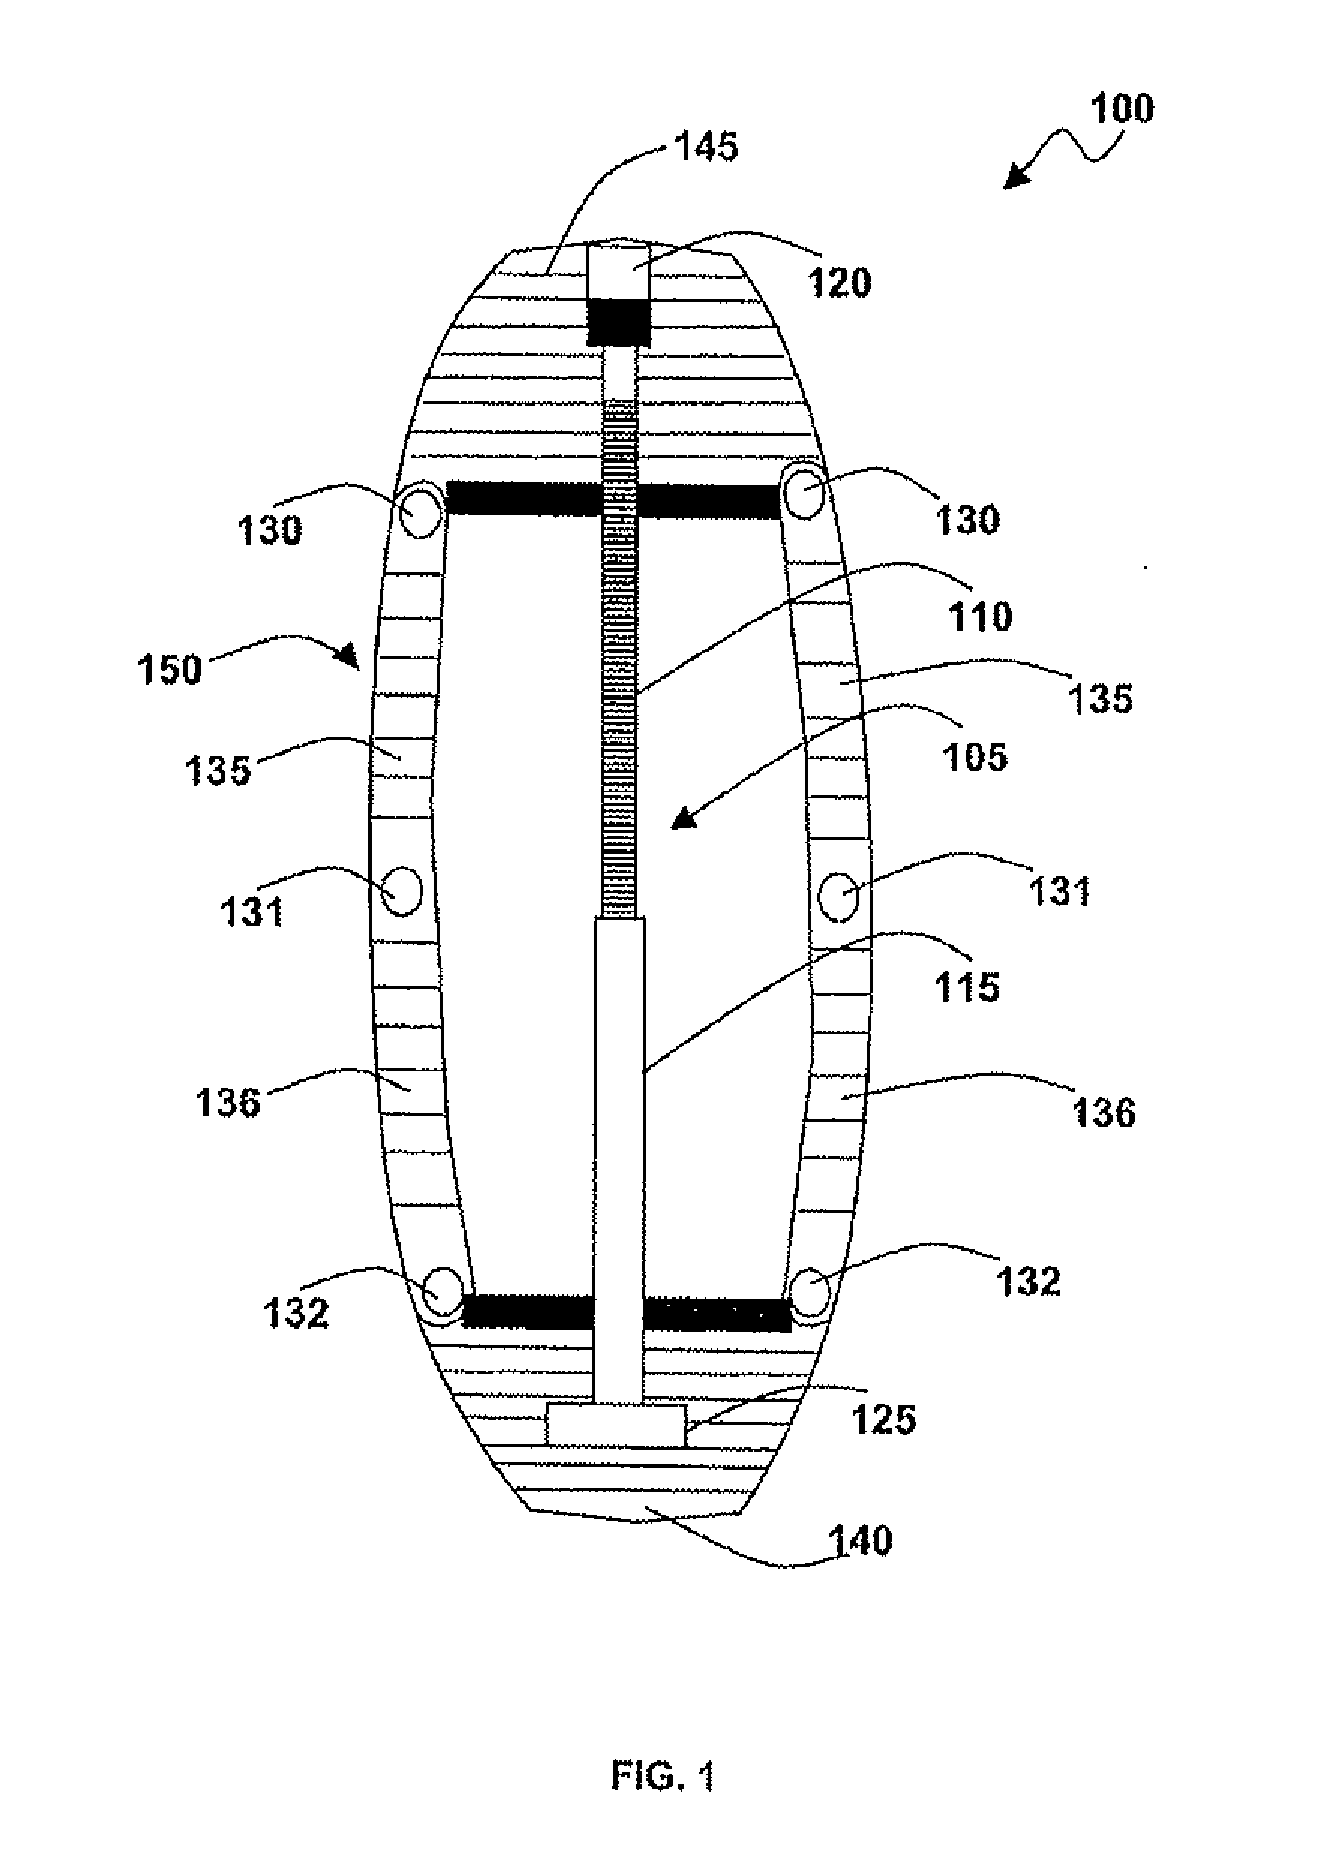 Implant apparatus and method including tee and screw mechanism for spinal fusion